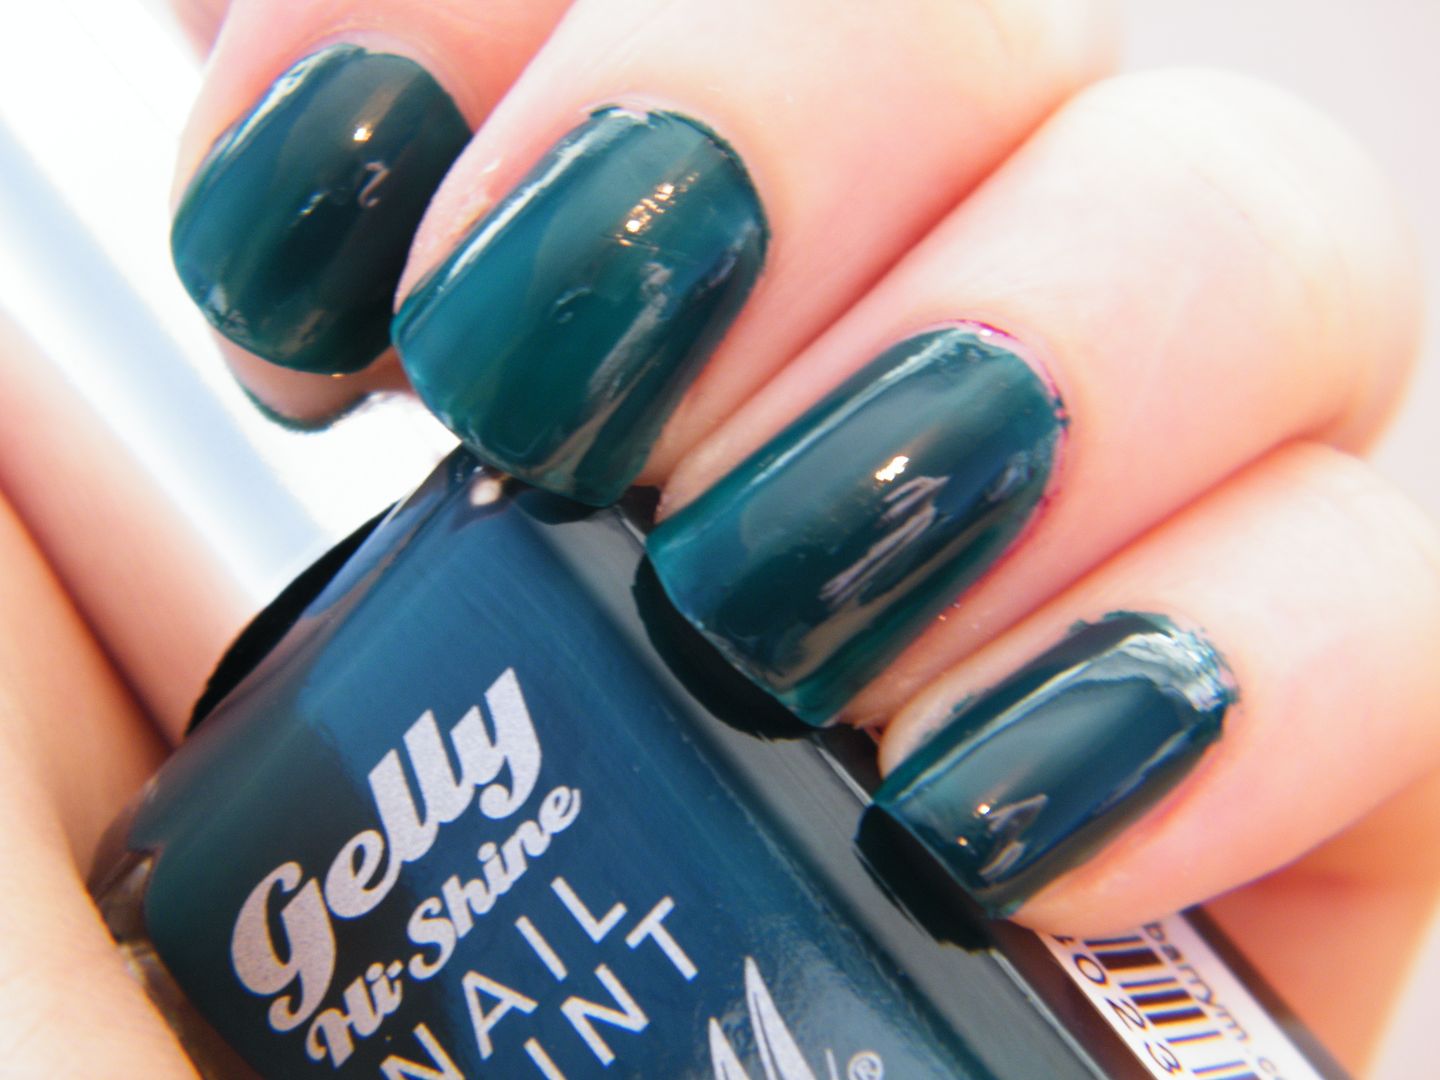 Barry M Gelly Hi-Shine Nail Paint in Watermelon